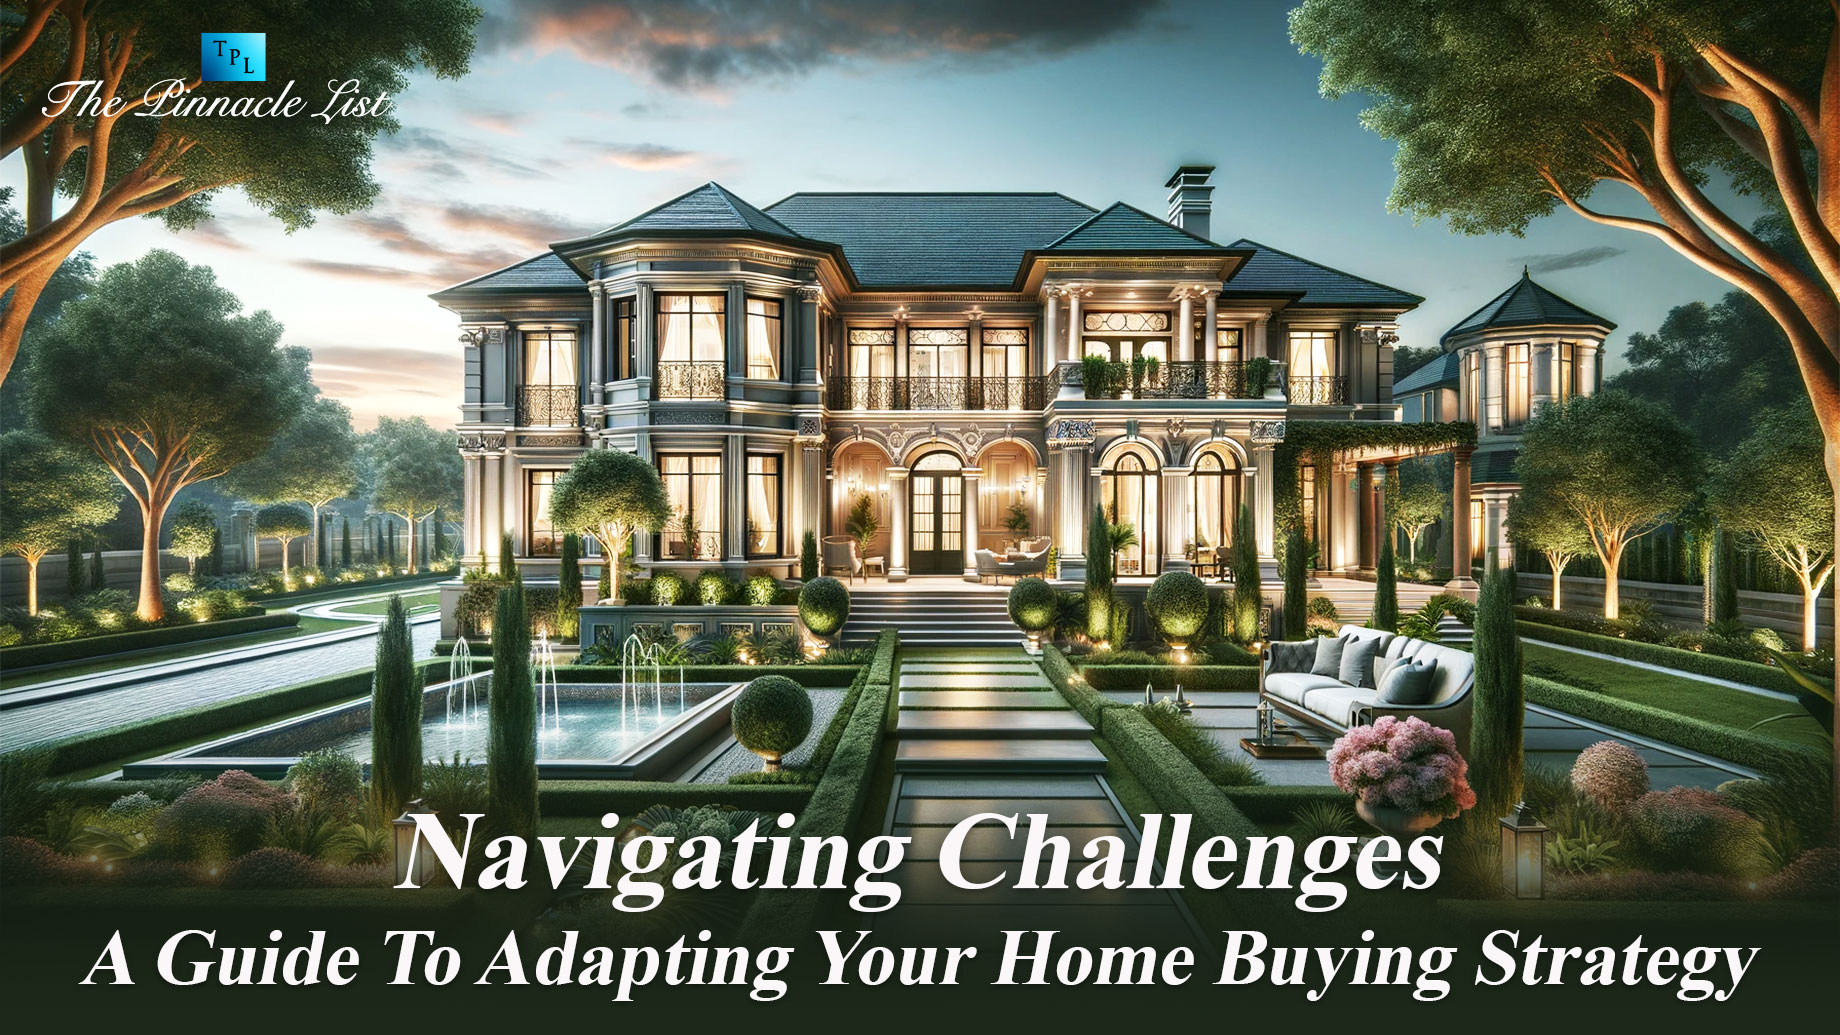 Navigating Challenges: A Guide To Adapting Your Home Buying Strategy